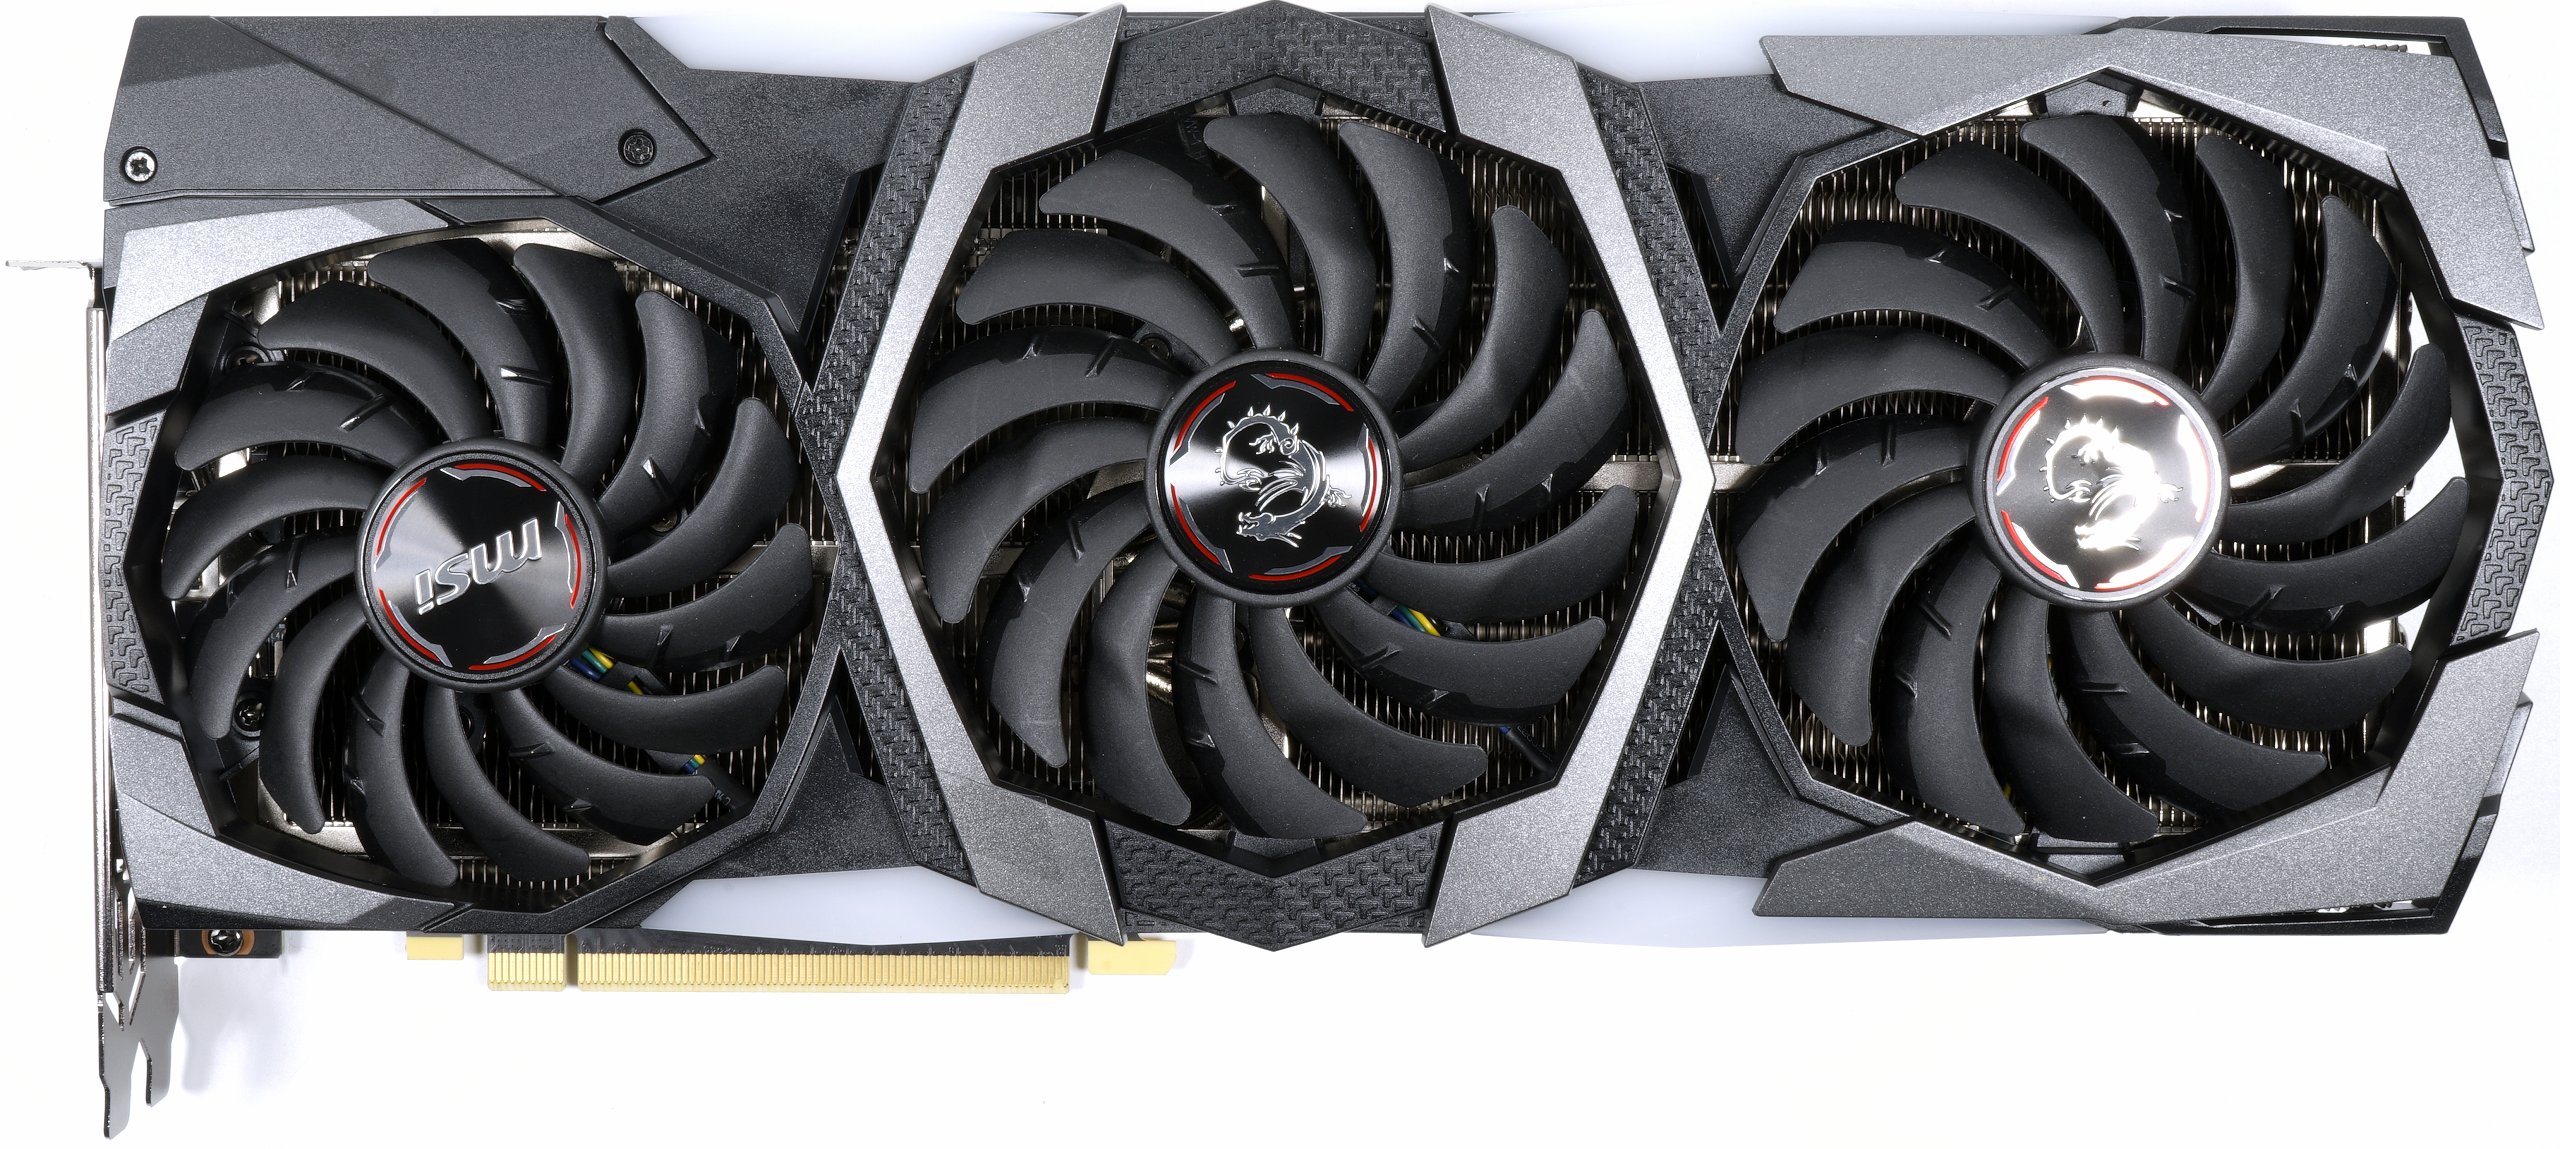 MSI GeForce RTX 2080 Ti Gaming Trio in review - thick jaws, cool | igor'sLAB